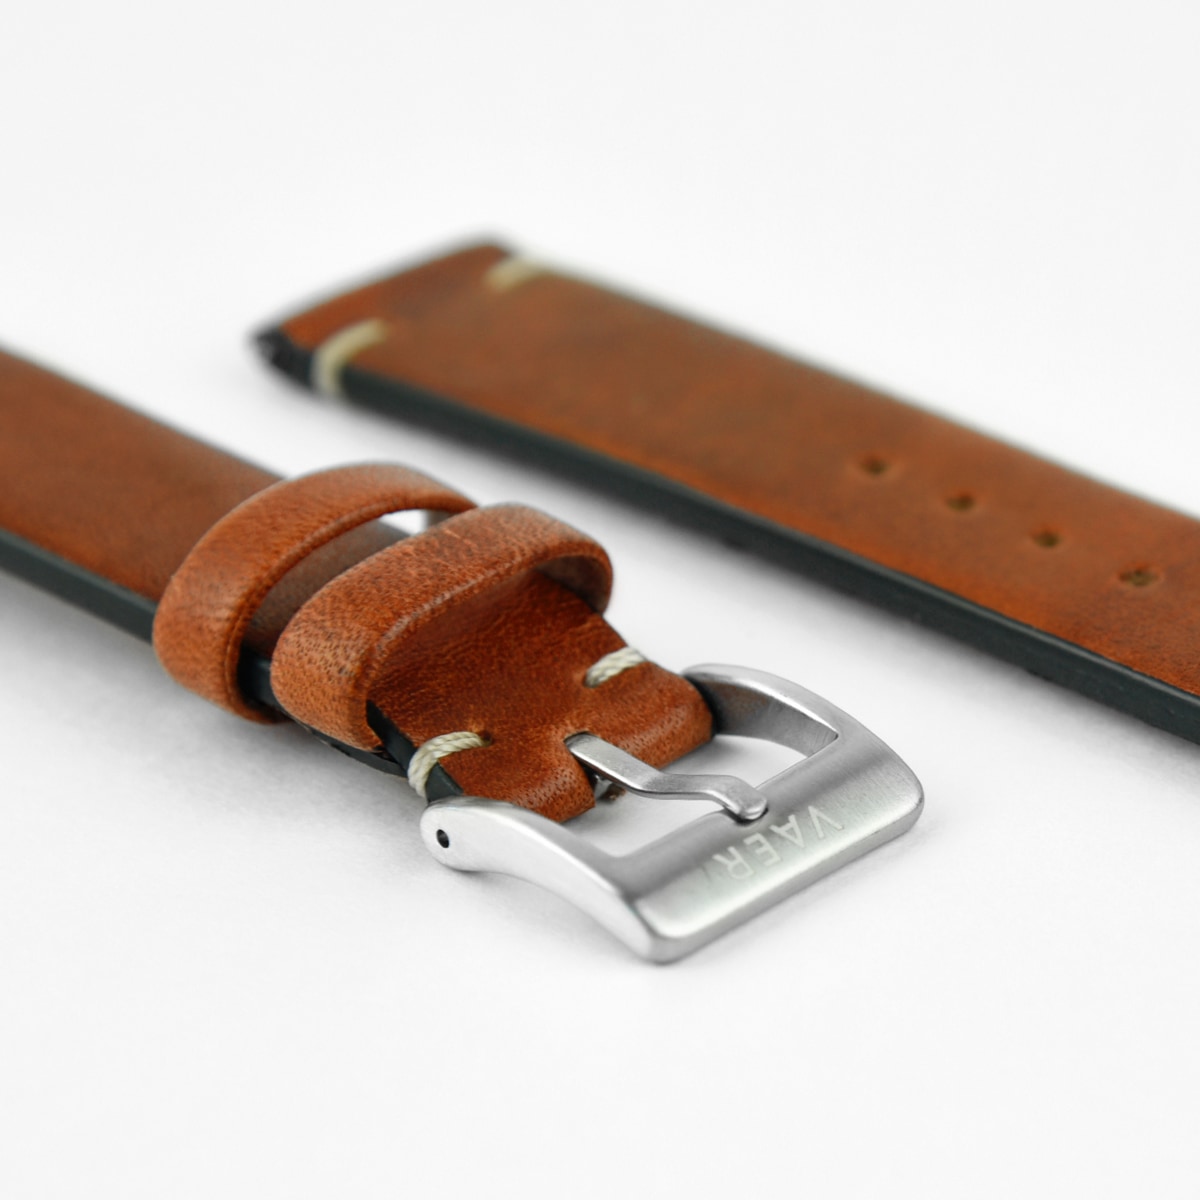 Lined Horween Leather Strap